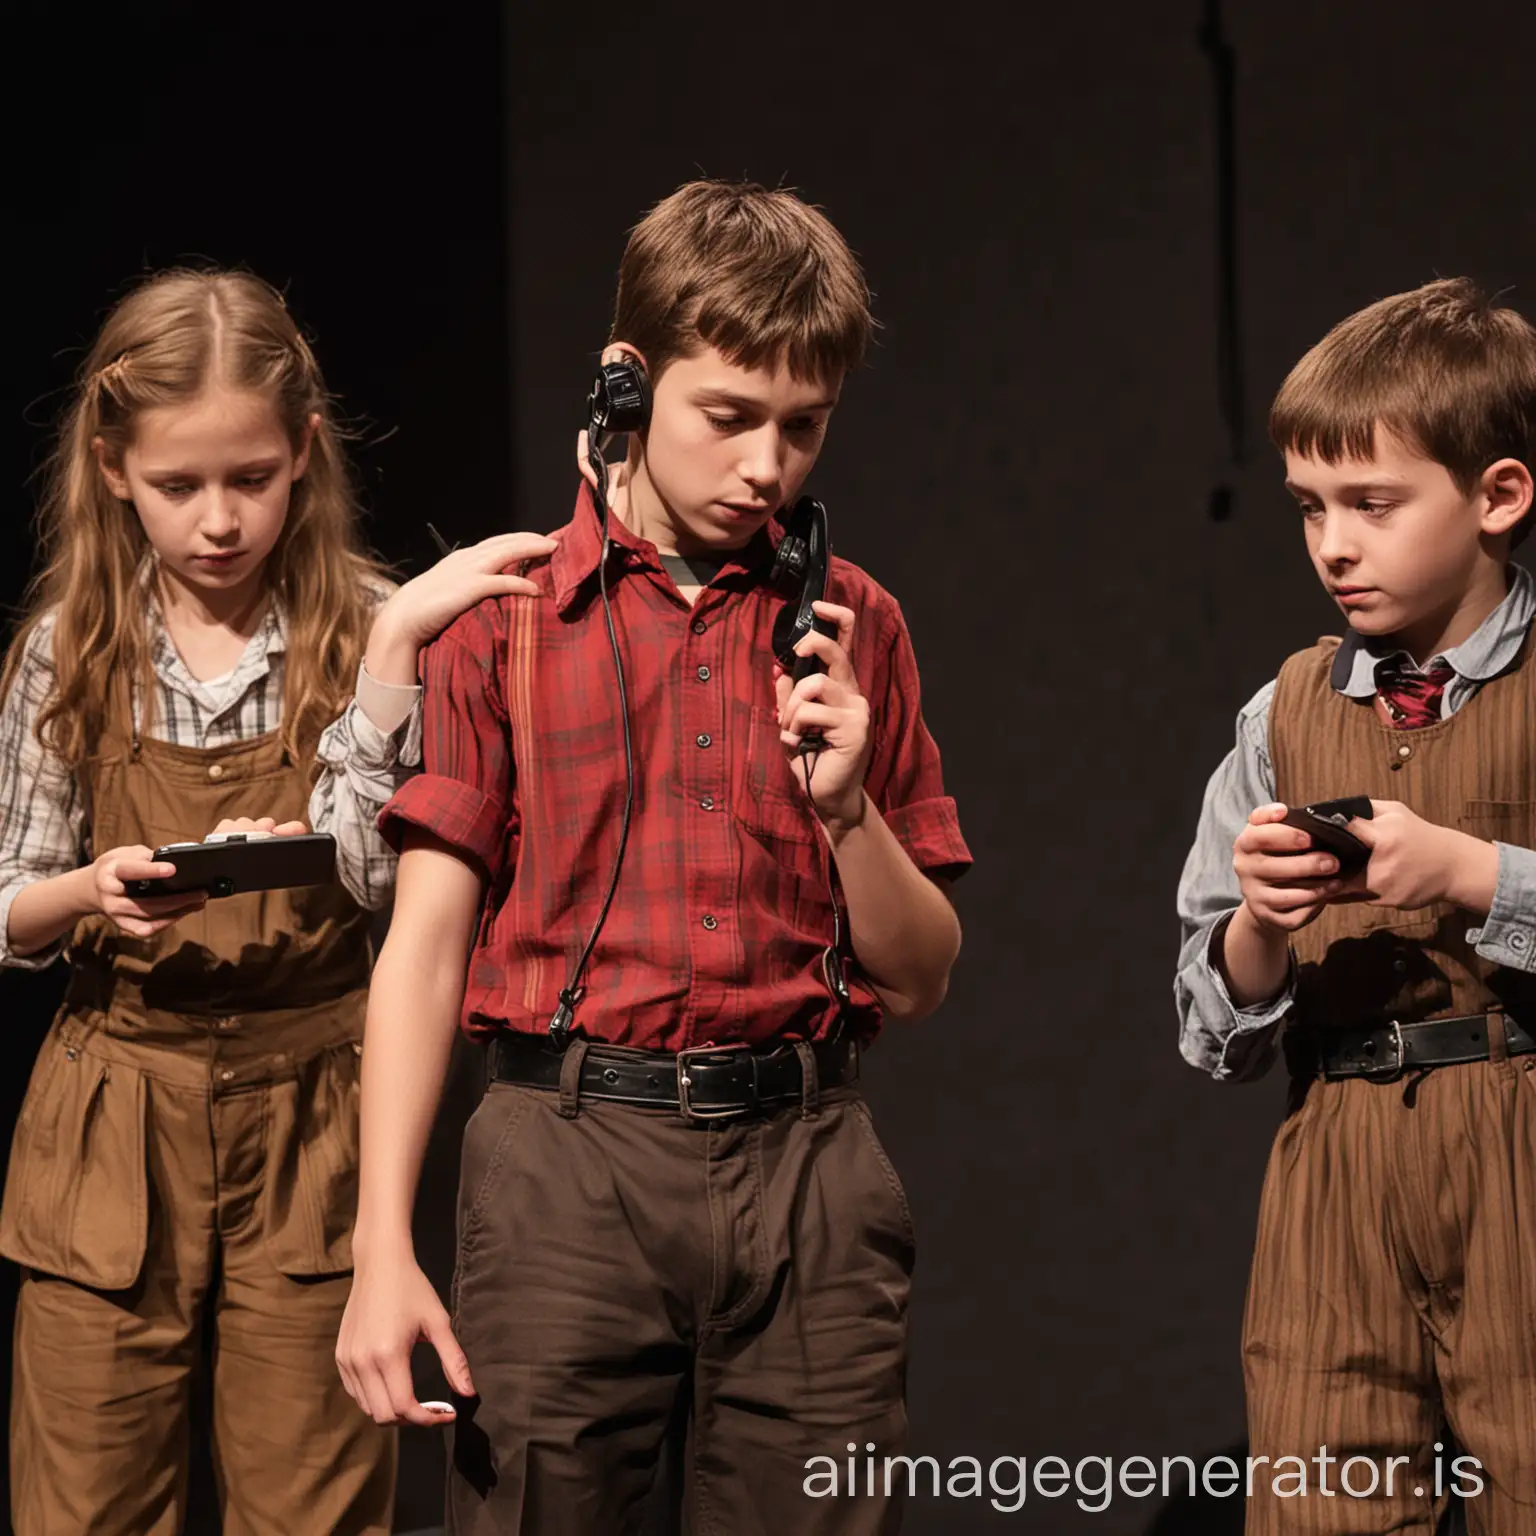 Childrens-Theatrical-Play-Jad-and-the-Phone-Confronting-Phone-Addiction